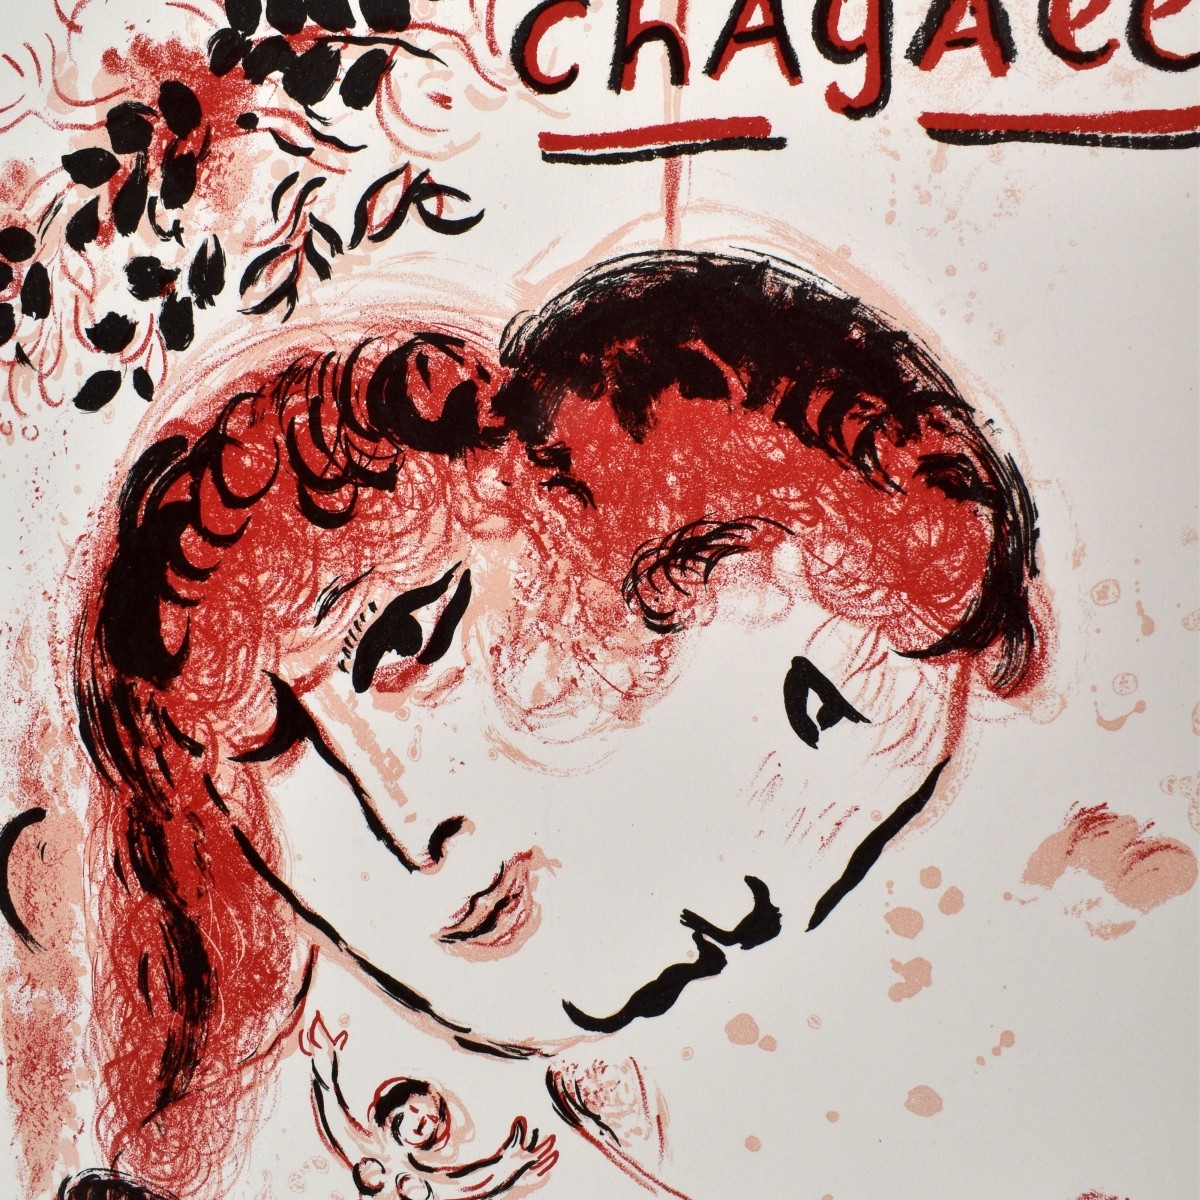 After: Marc Chagall (1887 - 1985)